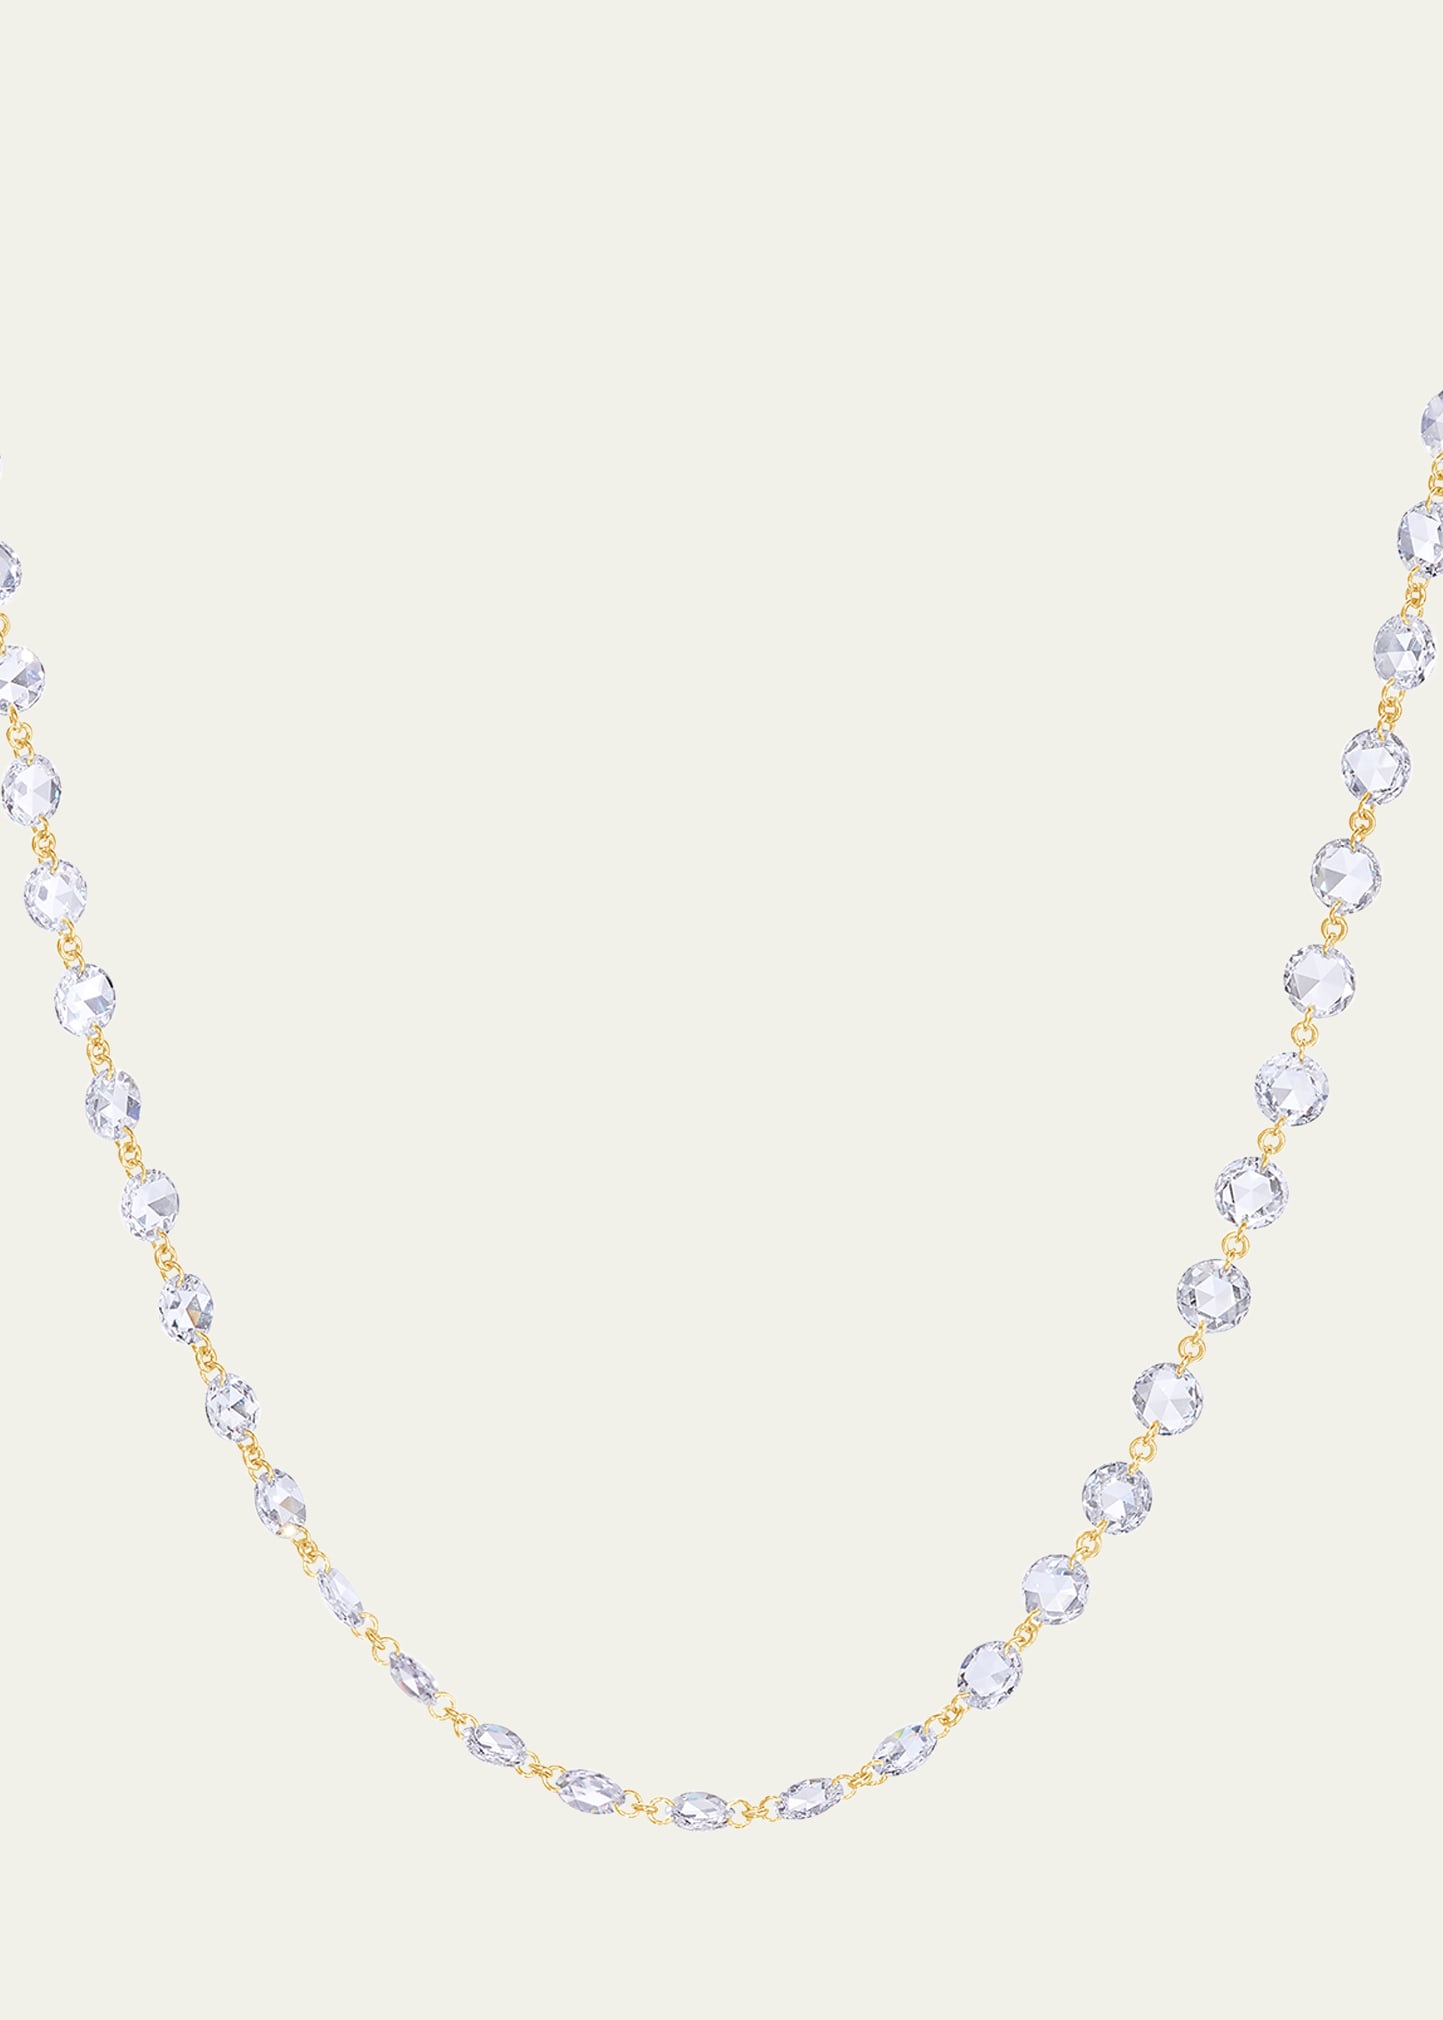 64 Facets 18k Gold Diamond Chain Necklace